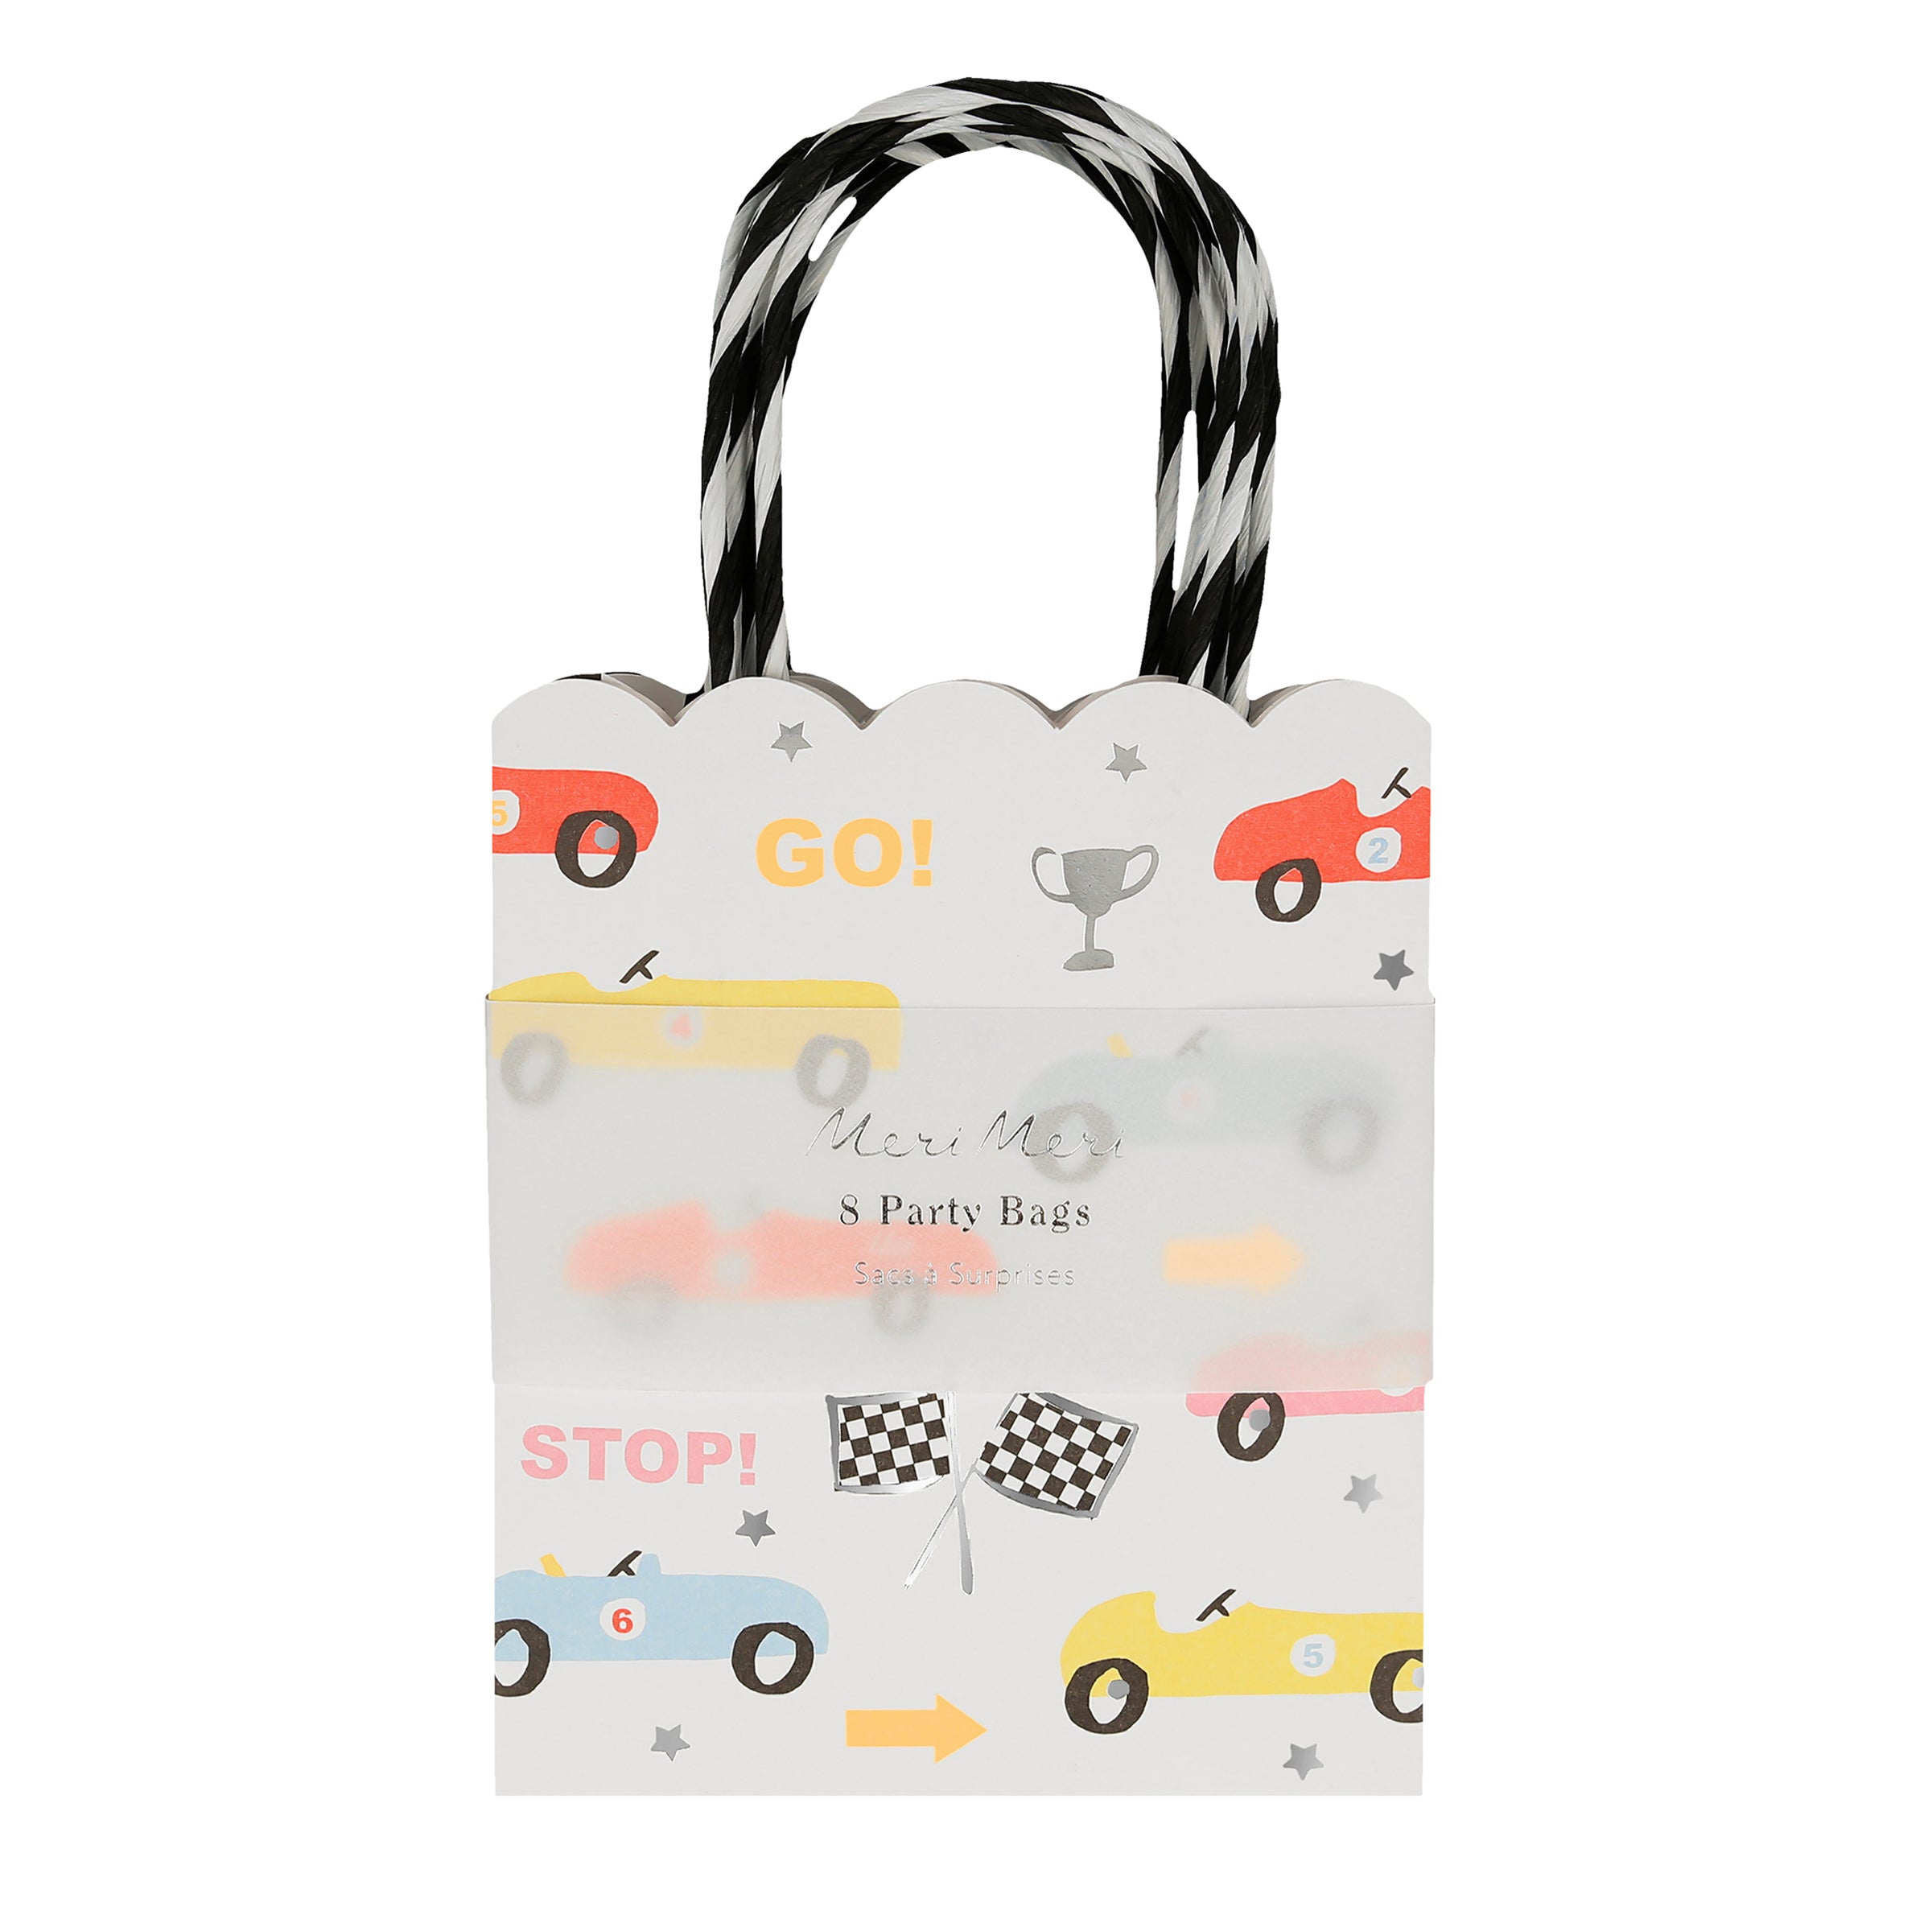 These colourful race car paper bags are great to fill with party favours for a race car birthday party.